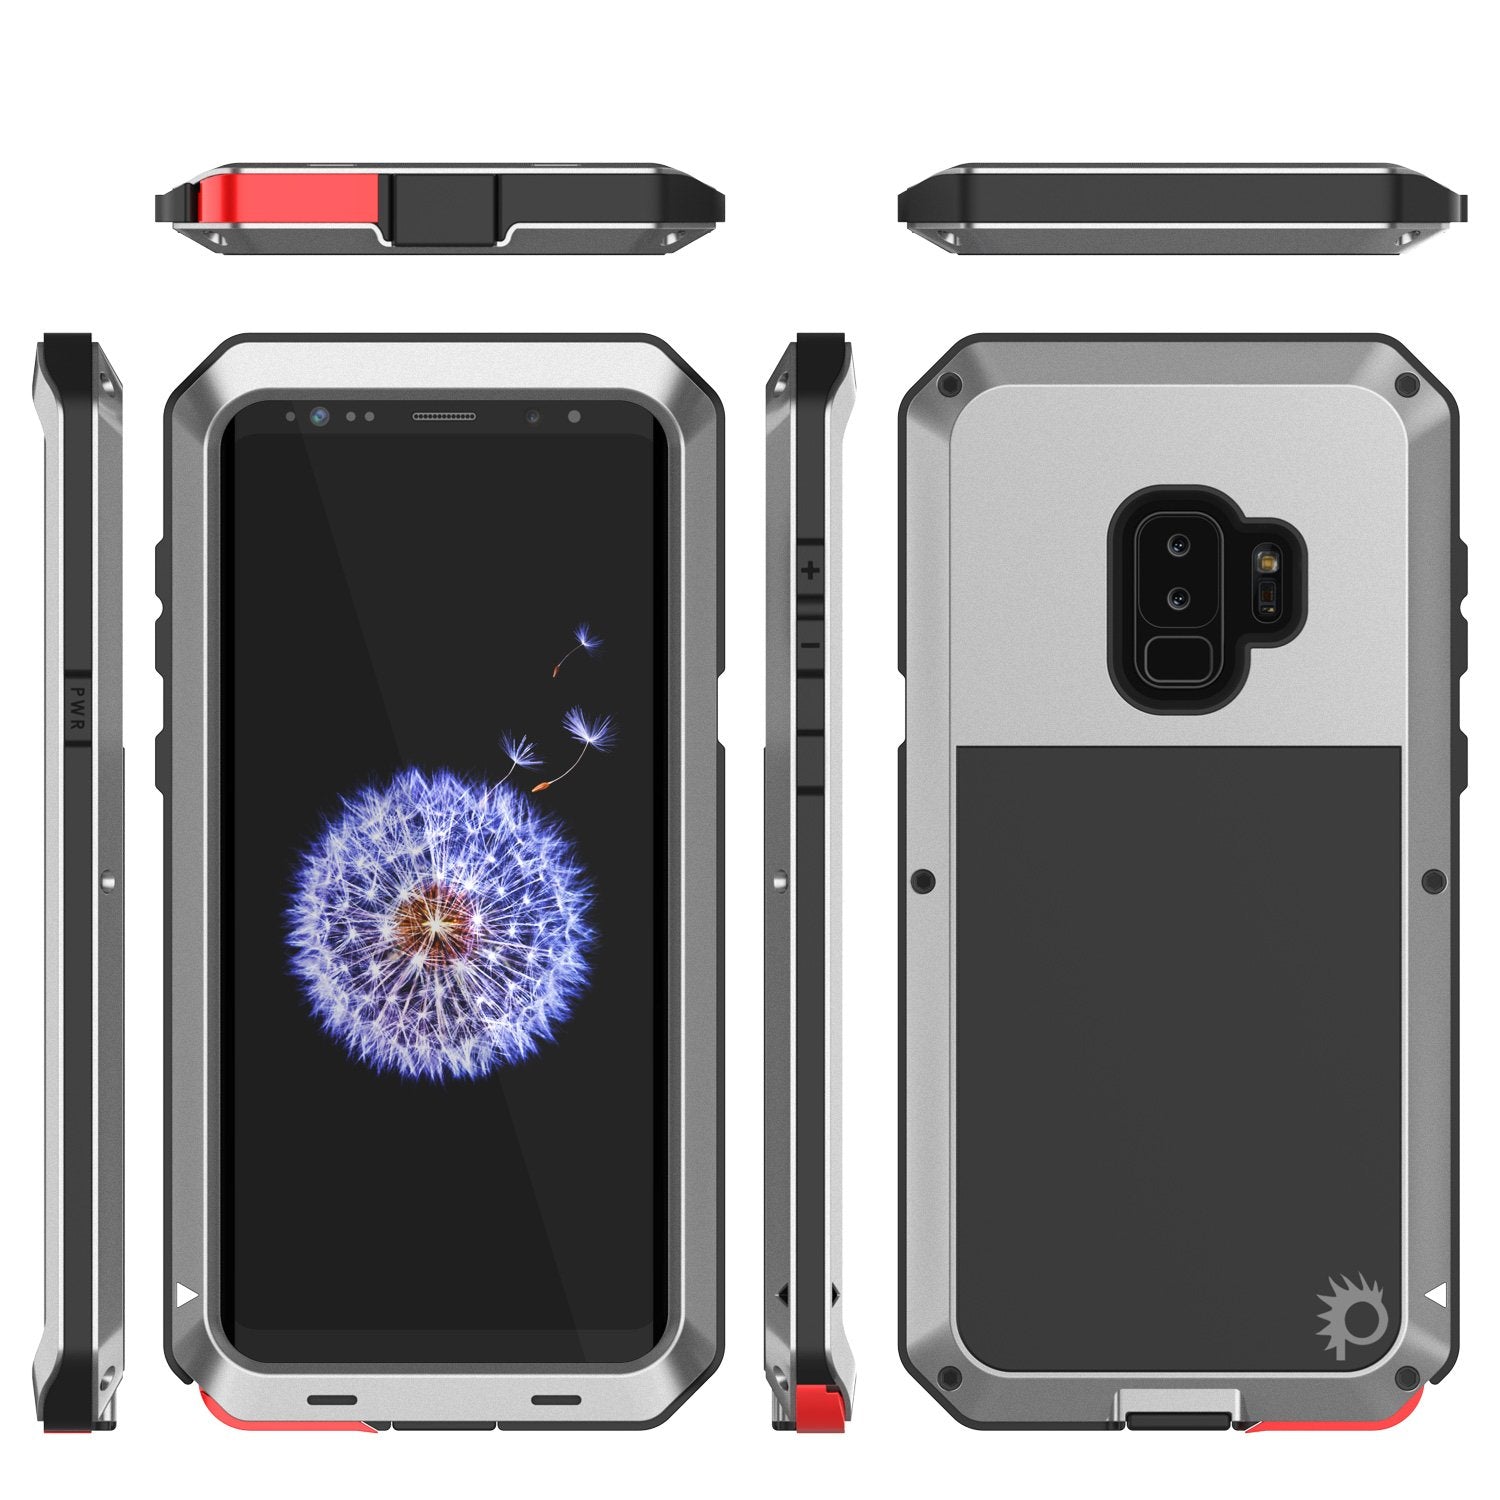 Galaxy S9 Plus Metal Case, Heavy Duty Military Grade Rugged Armor Cover [shock proof] Hybrid Full Body Hard Aluminum & TPU Design [non slip] W/ Prime Drop Protection for Samsung Galaxy S9 Plus [Silver]